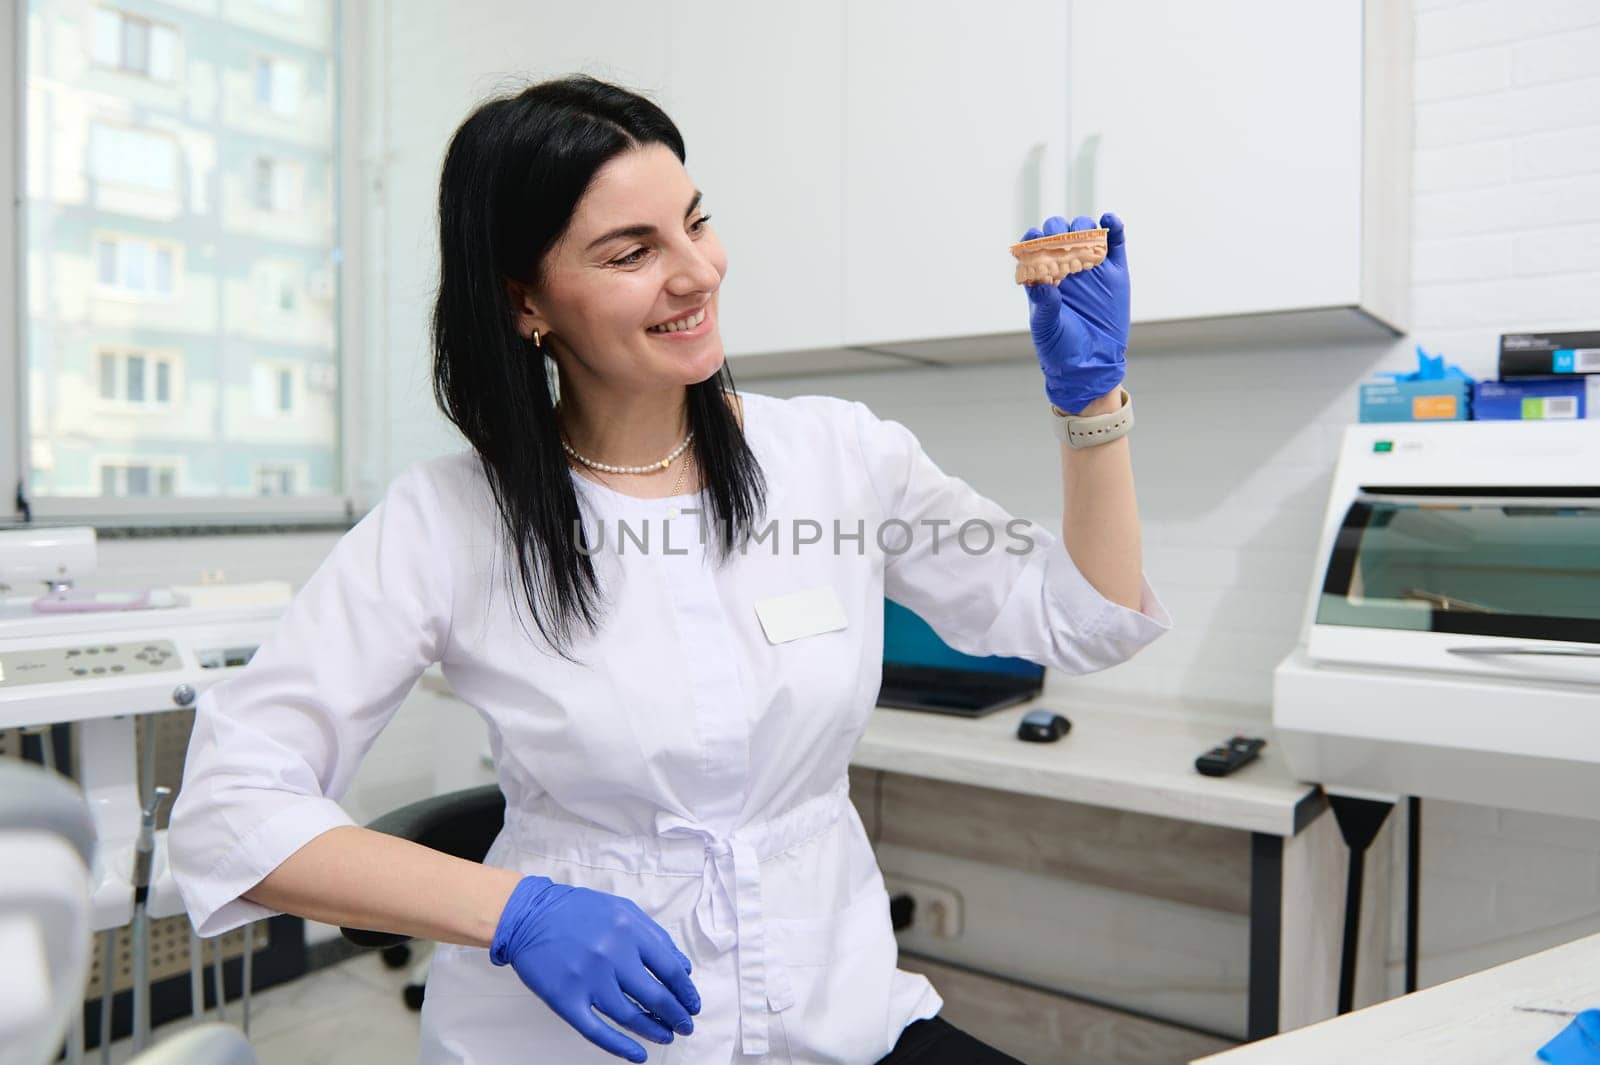 Professional experienced dentist woman, maxillofacial surgeon, prosthetic engineer, dental technician holding plaster cast of a human jaw model with teeth. Installing veneer or prosthetics in clinic